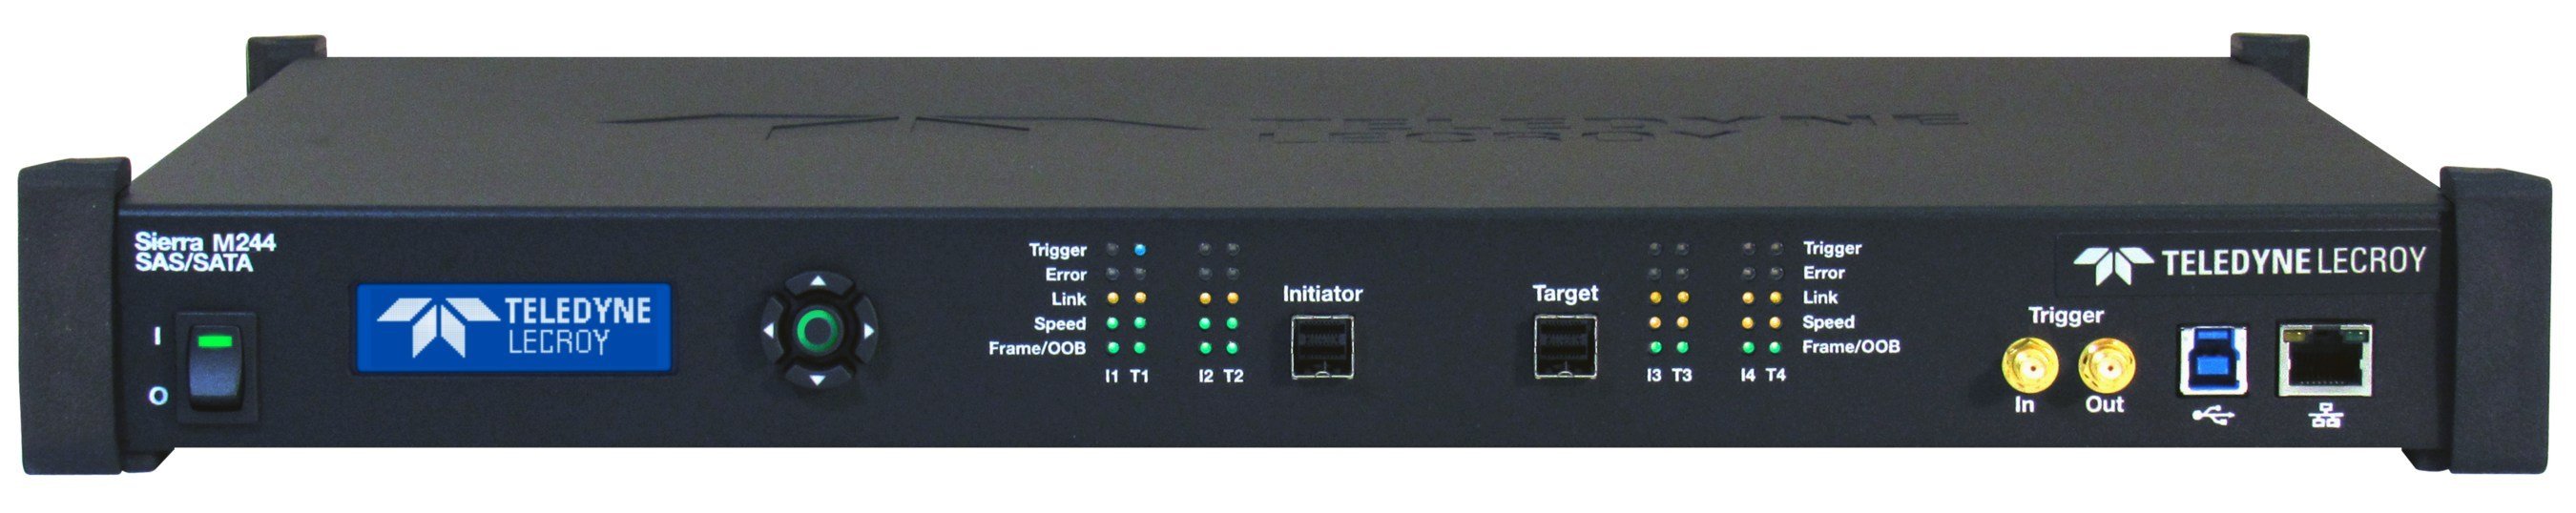 Teledyne LeCroy offers the SAS 40 exerciser option for its Sierra M244